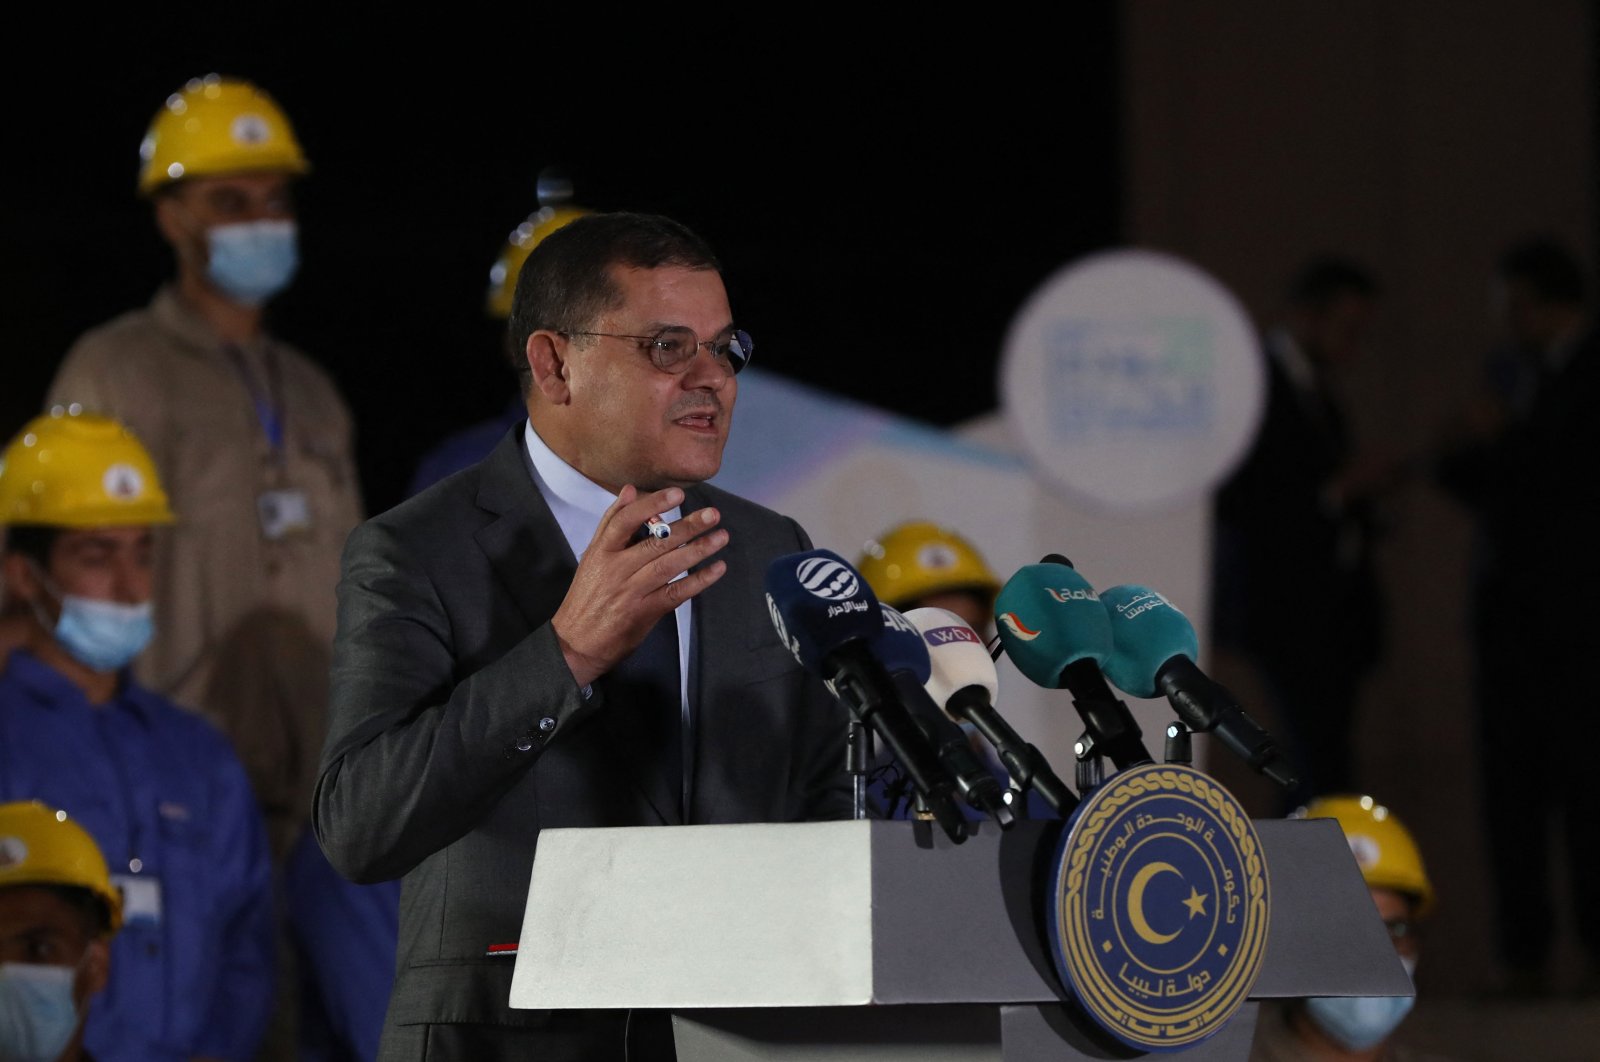 Libyan Prime Minister Abdul Hamid Mohammed Dbeibah speaks during the signing ceremony for the oil refinery and gas factory project in south Libya, at the National Oil Corporation building in the capital Tripoli, Libya, Oct.3, 2021. (AFP File Photo)